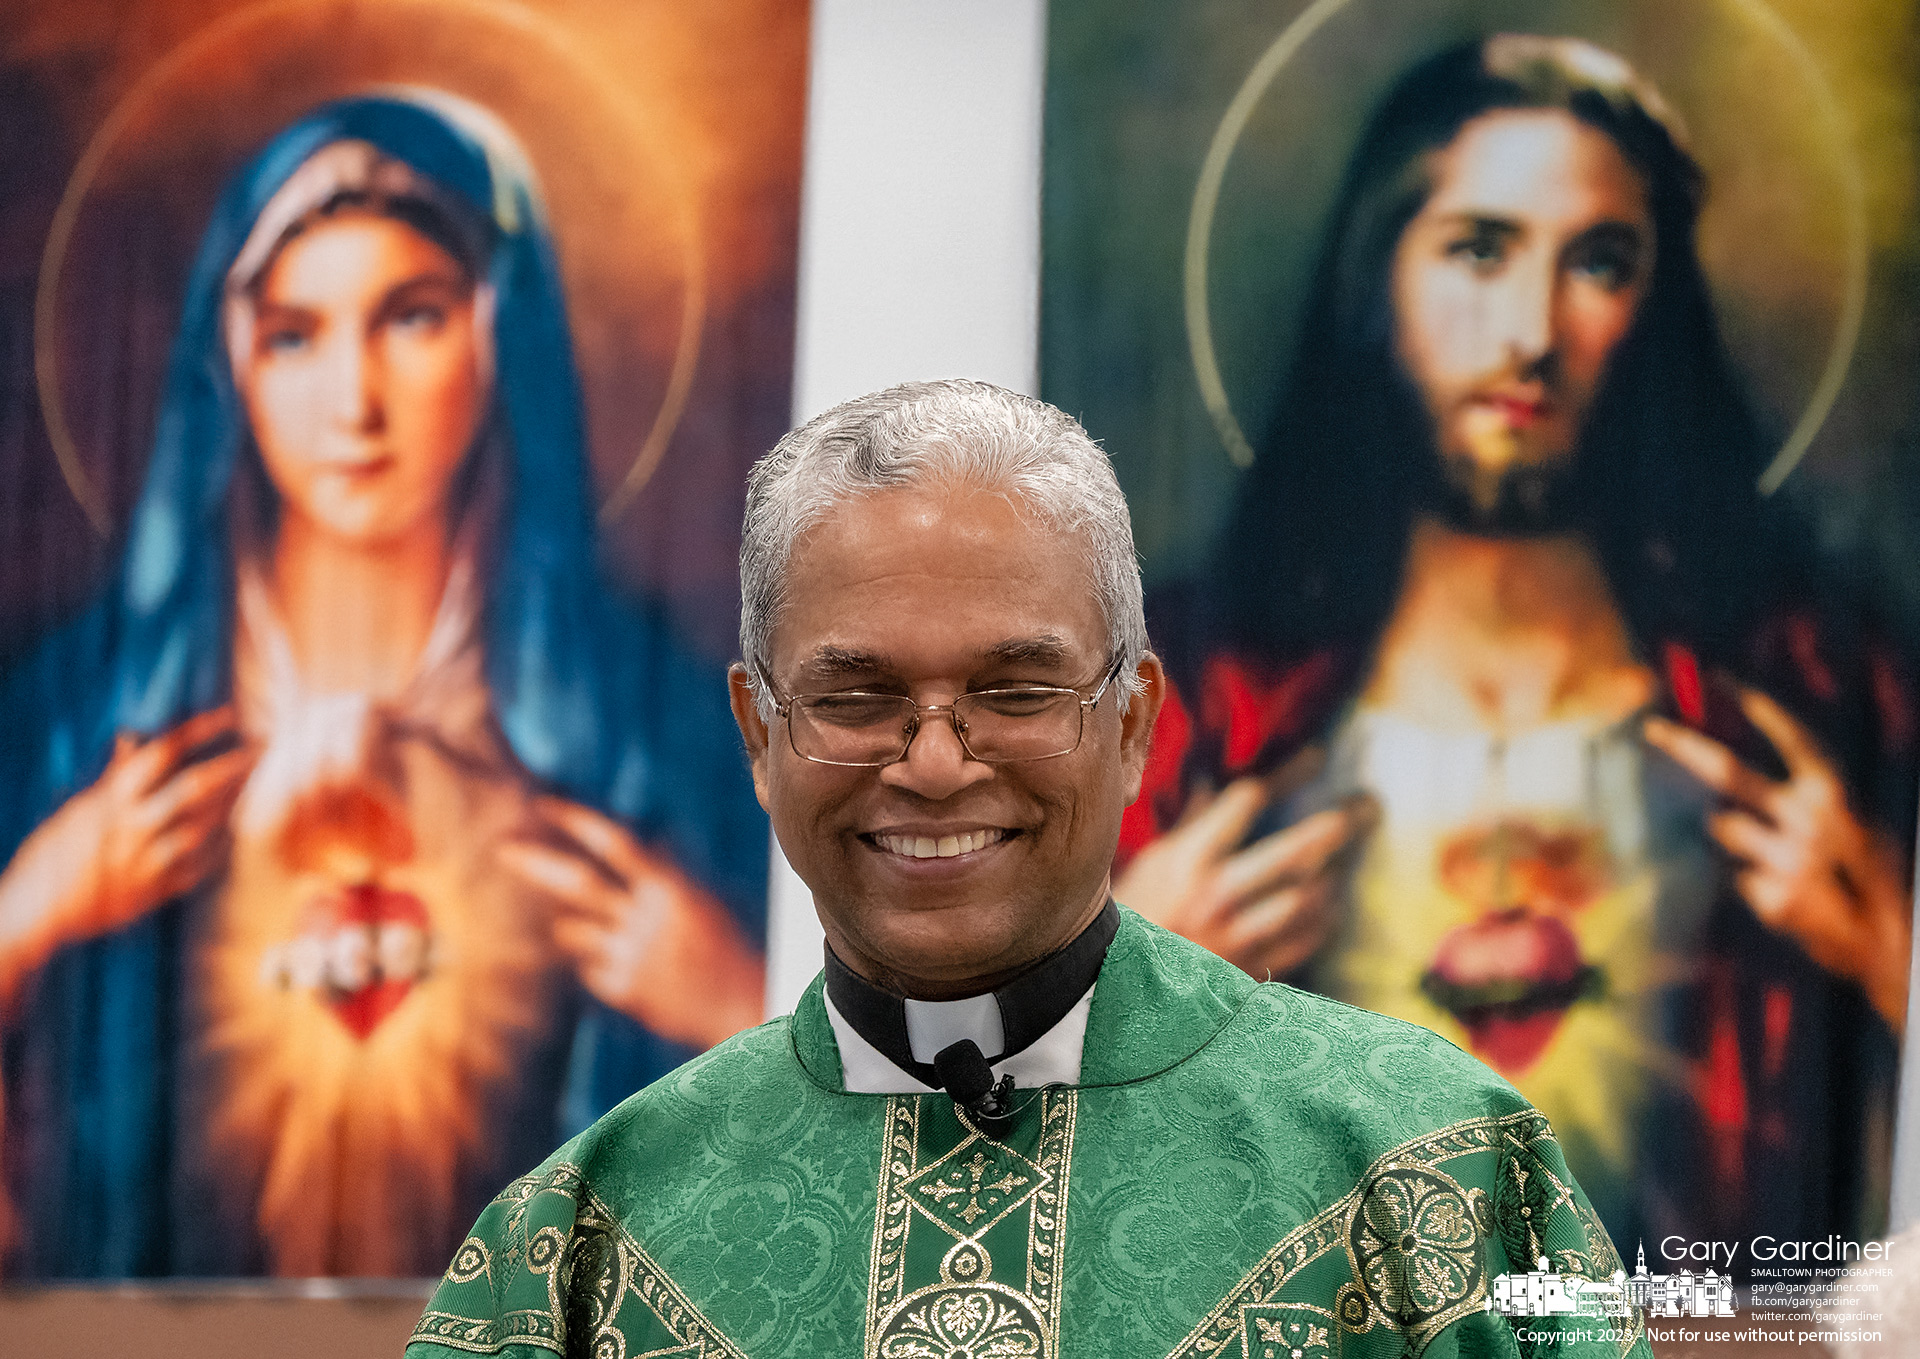 Fr. Antony Varghese smiles as he is greeted at a coffee and donut reception following his first Mass Sunday morning as a new Parochial Vicar at St. Paul the Apostle Catholic Church n Westerville. My Final Photo for July 16, 2023.